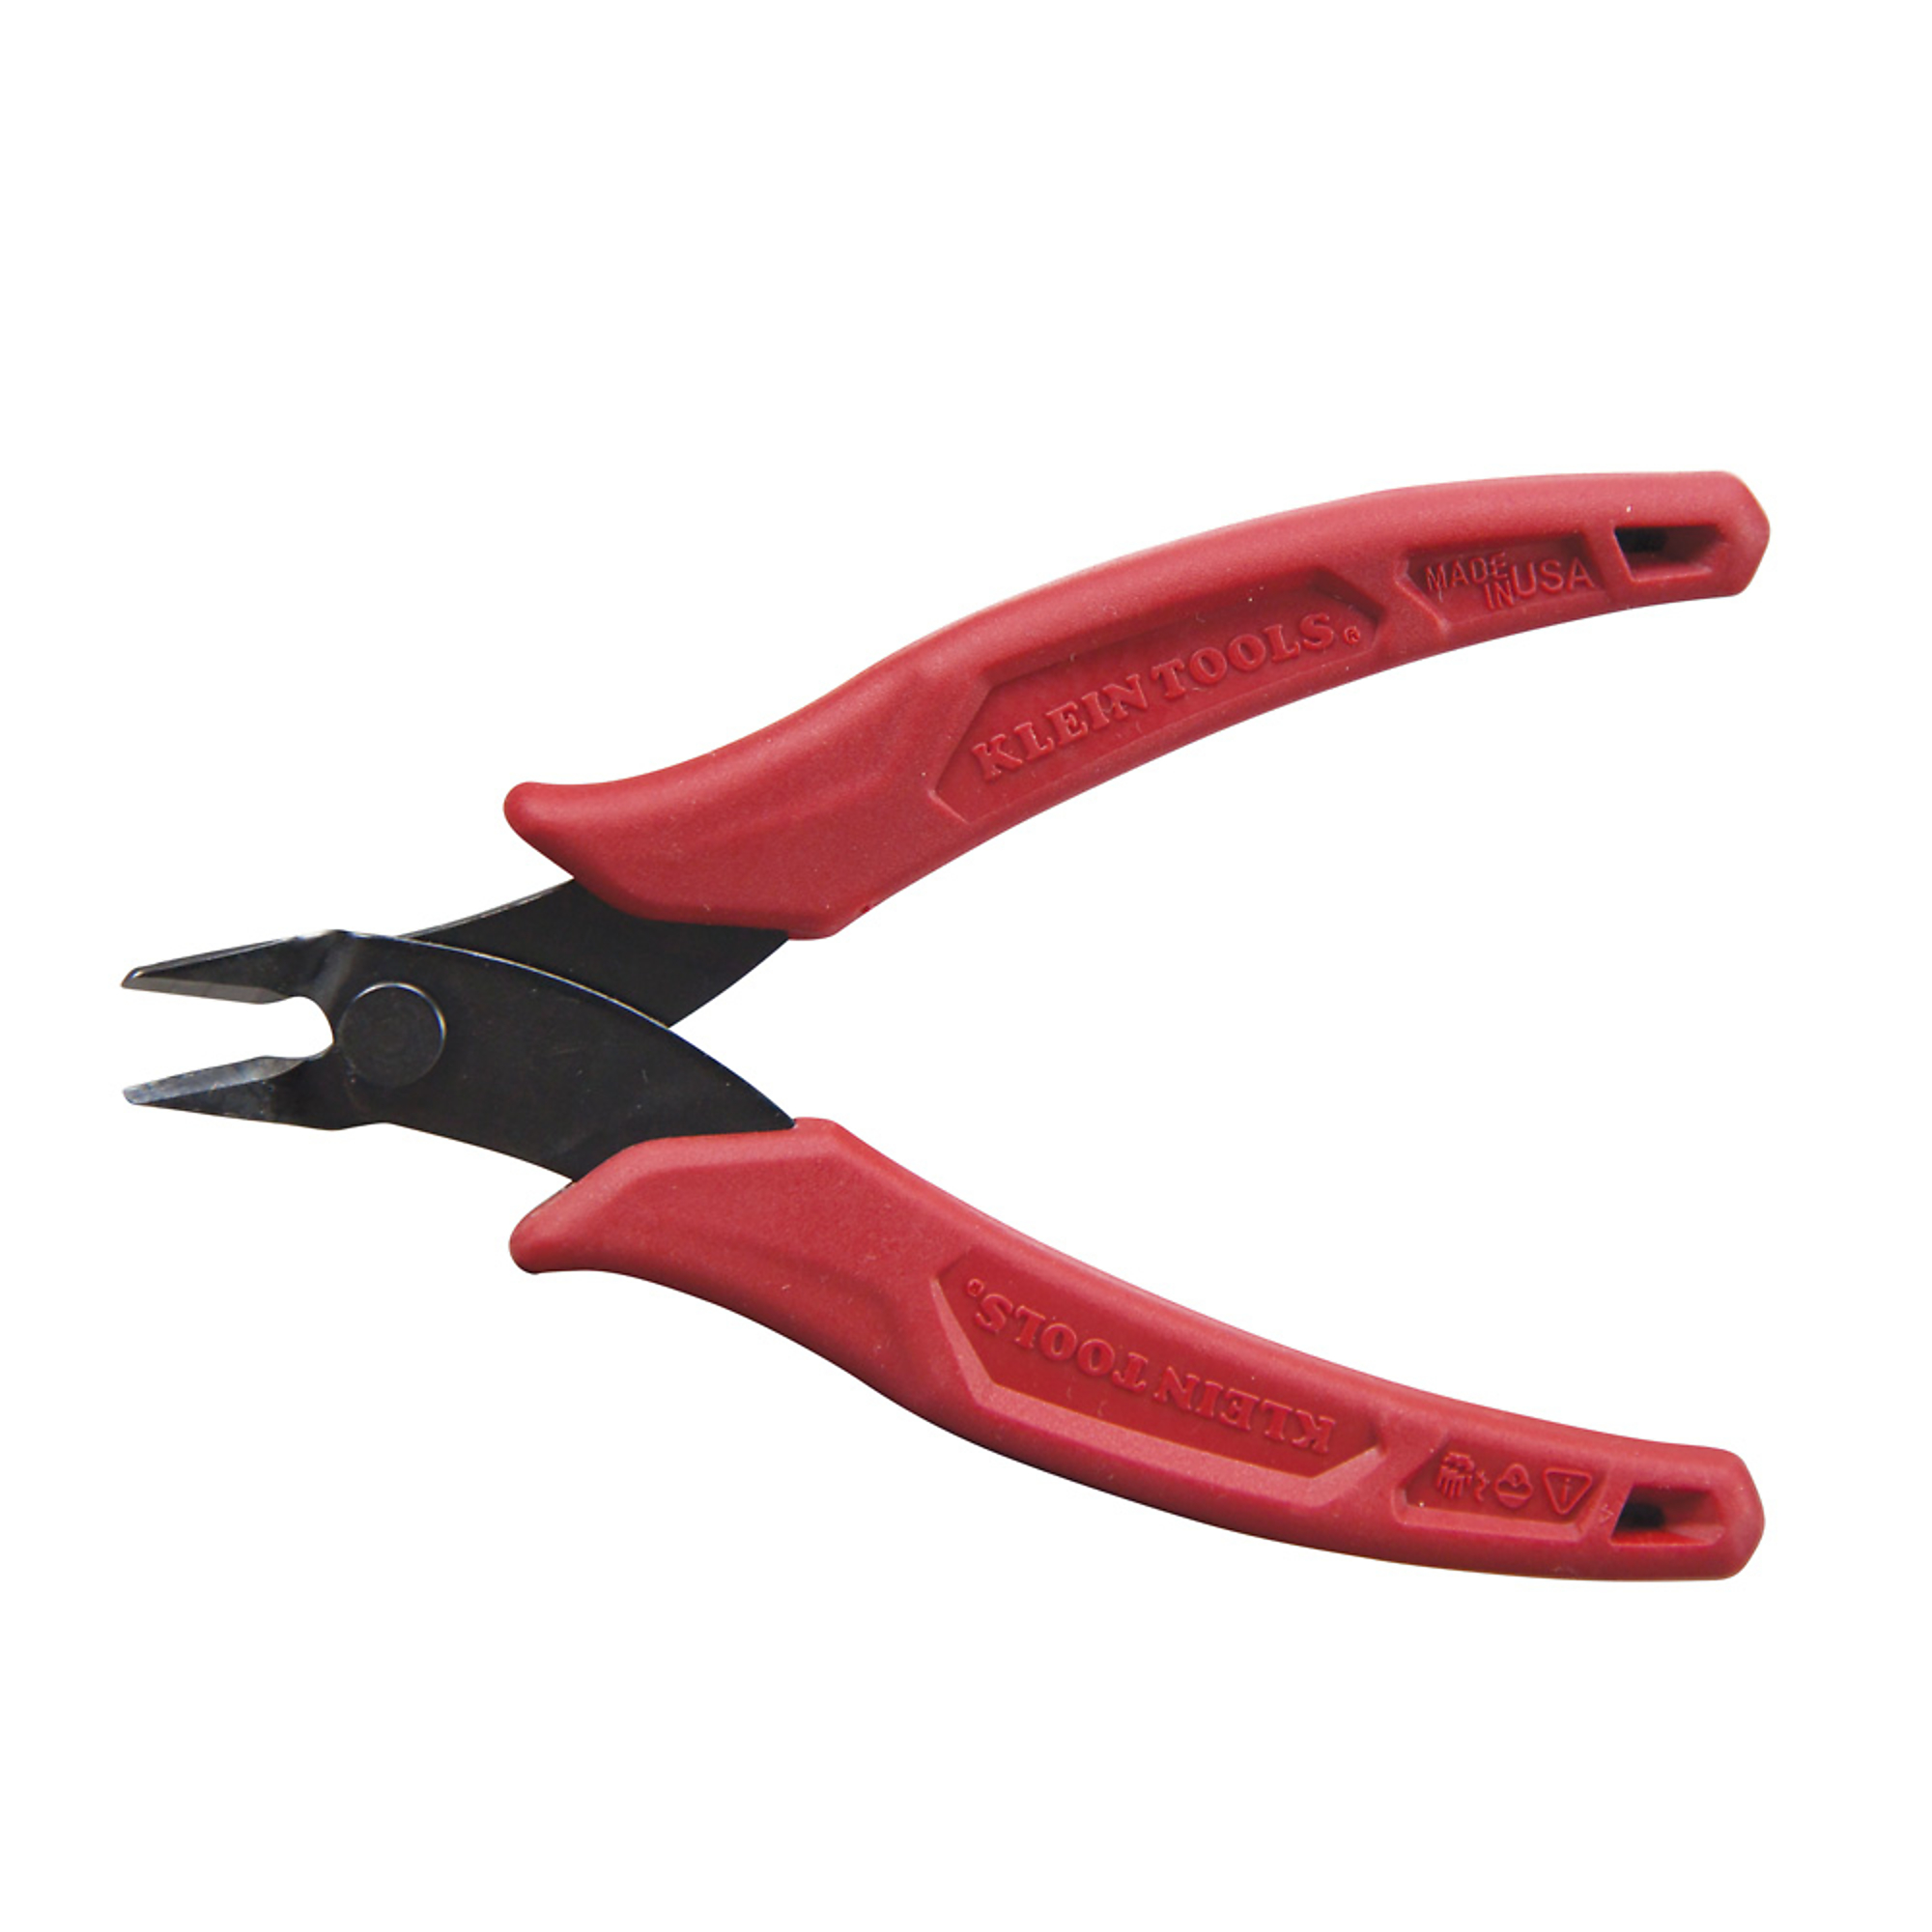 Klein Tools, Diagonal Cutting Pliers, Flush, Lightweight, 5Inch, Pieces (qty.) 1 Material Steel, Jaw Capacity 0.2 in, Model D275-5